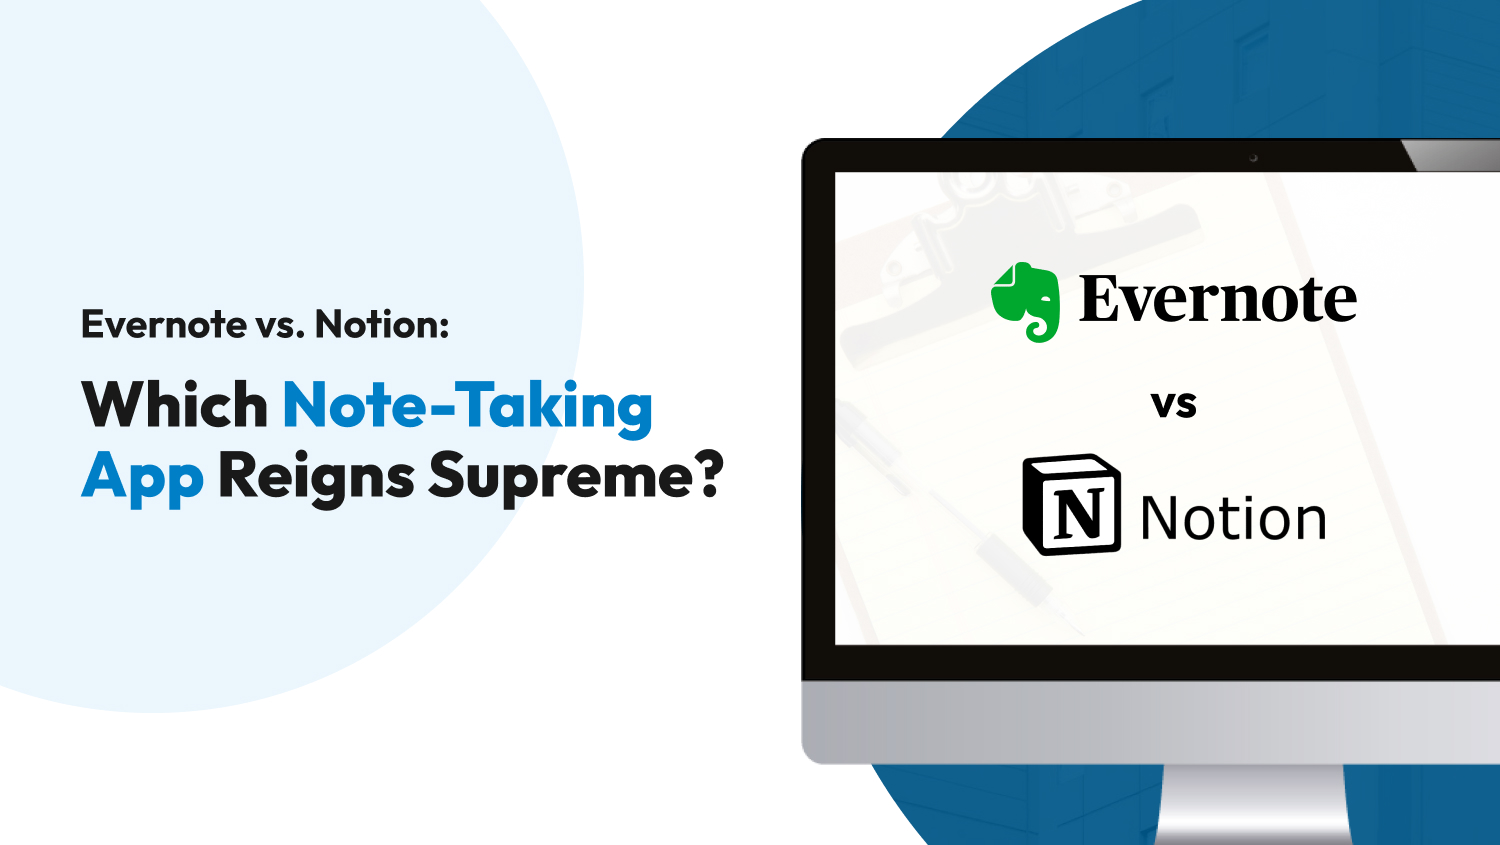 Evernote vs. Notion: Which Note-Taking App Reigns Supreme?